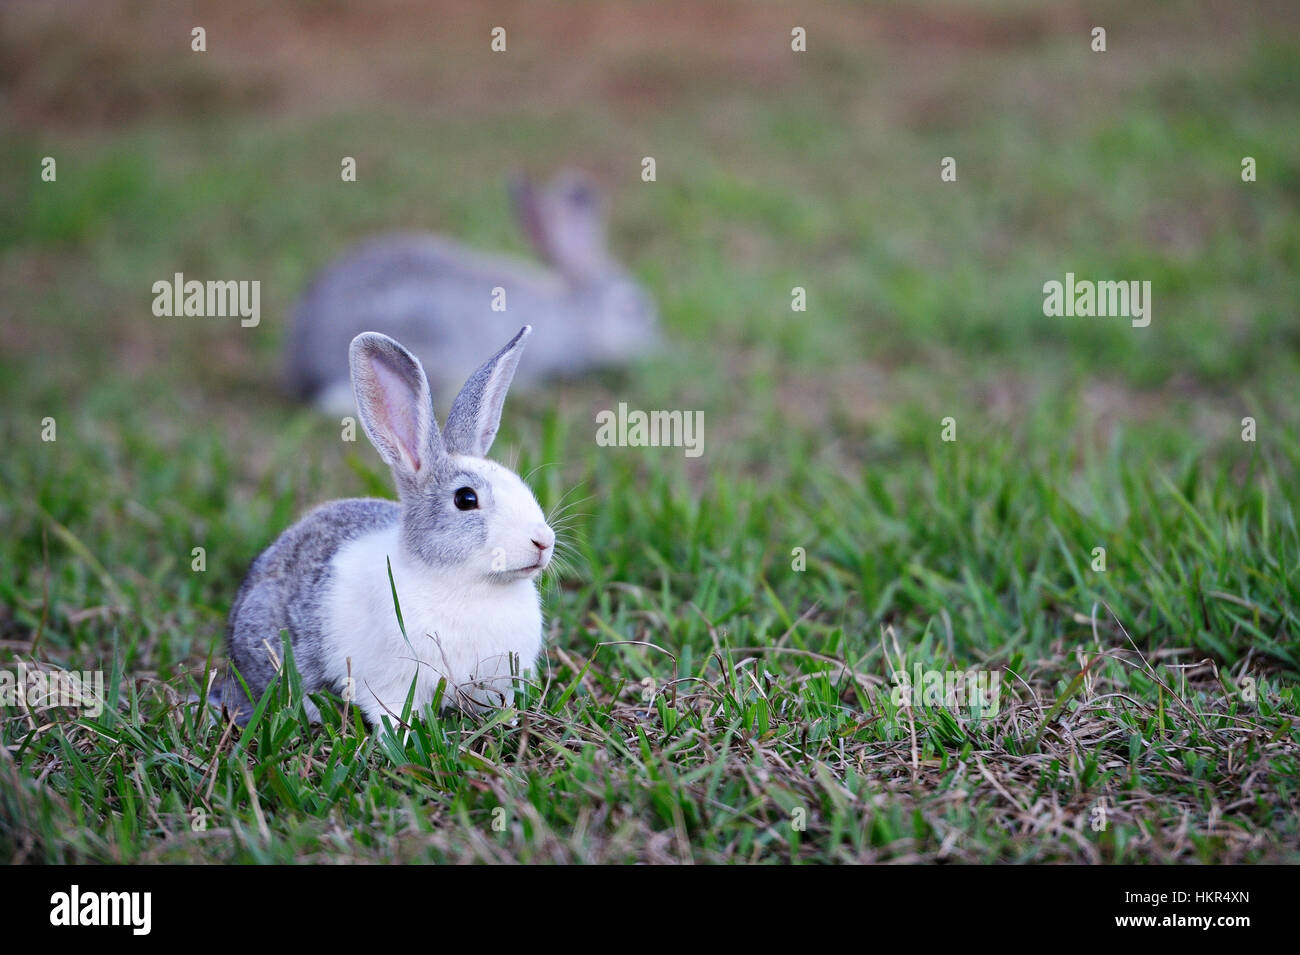 Lapin blanc gris lay on Green grass lawn Banque D'Images